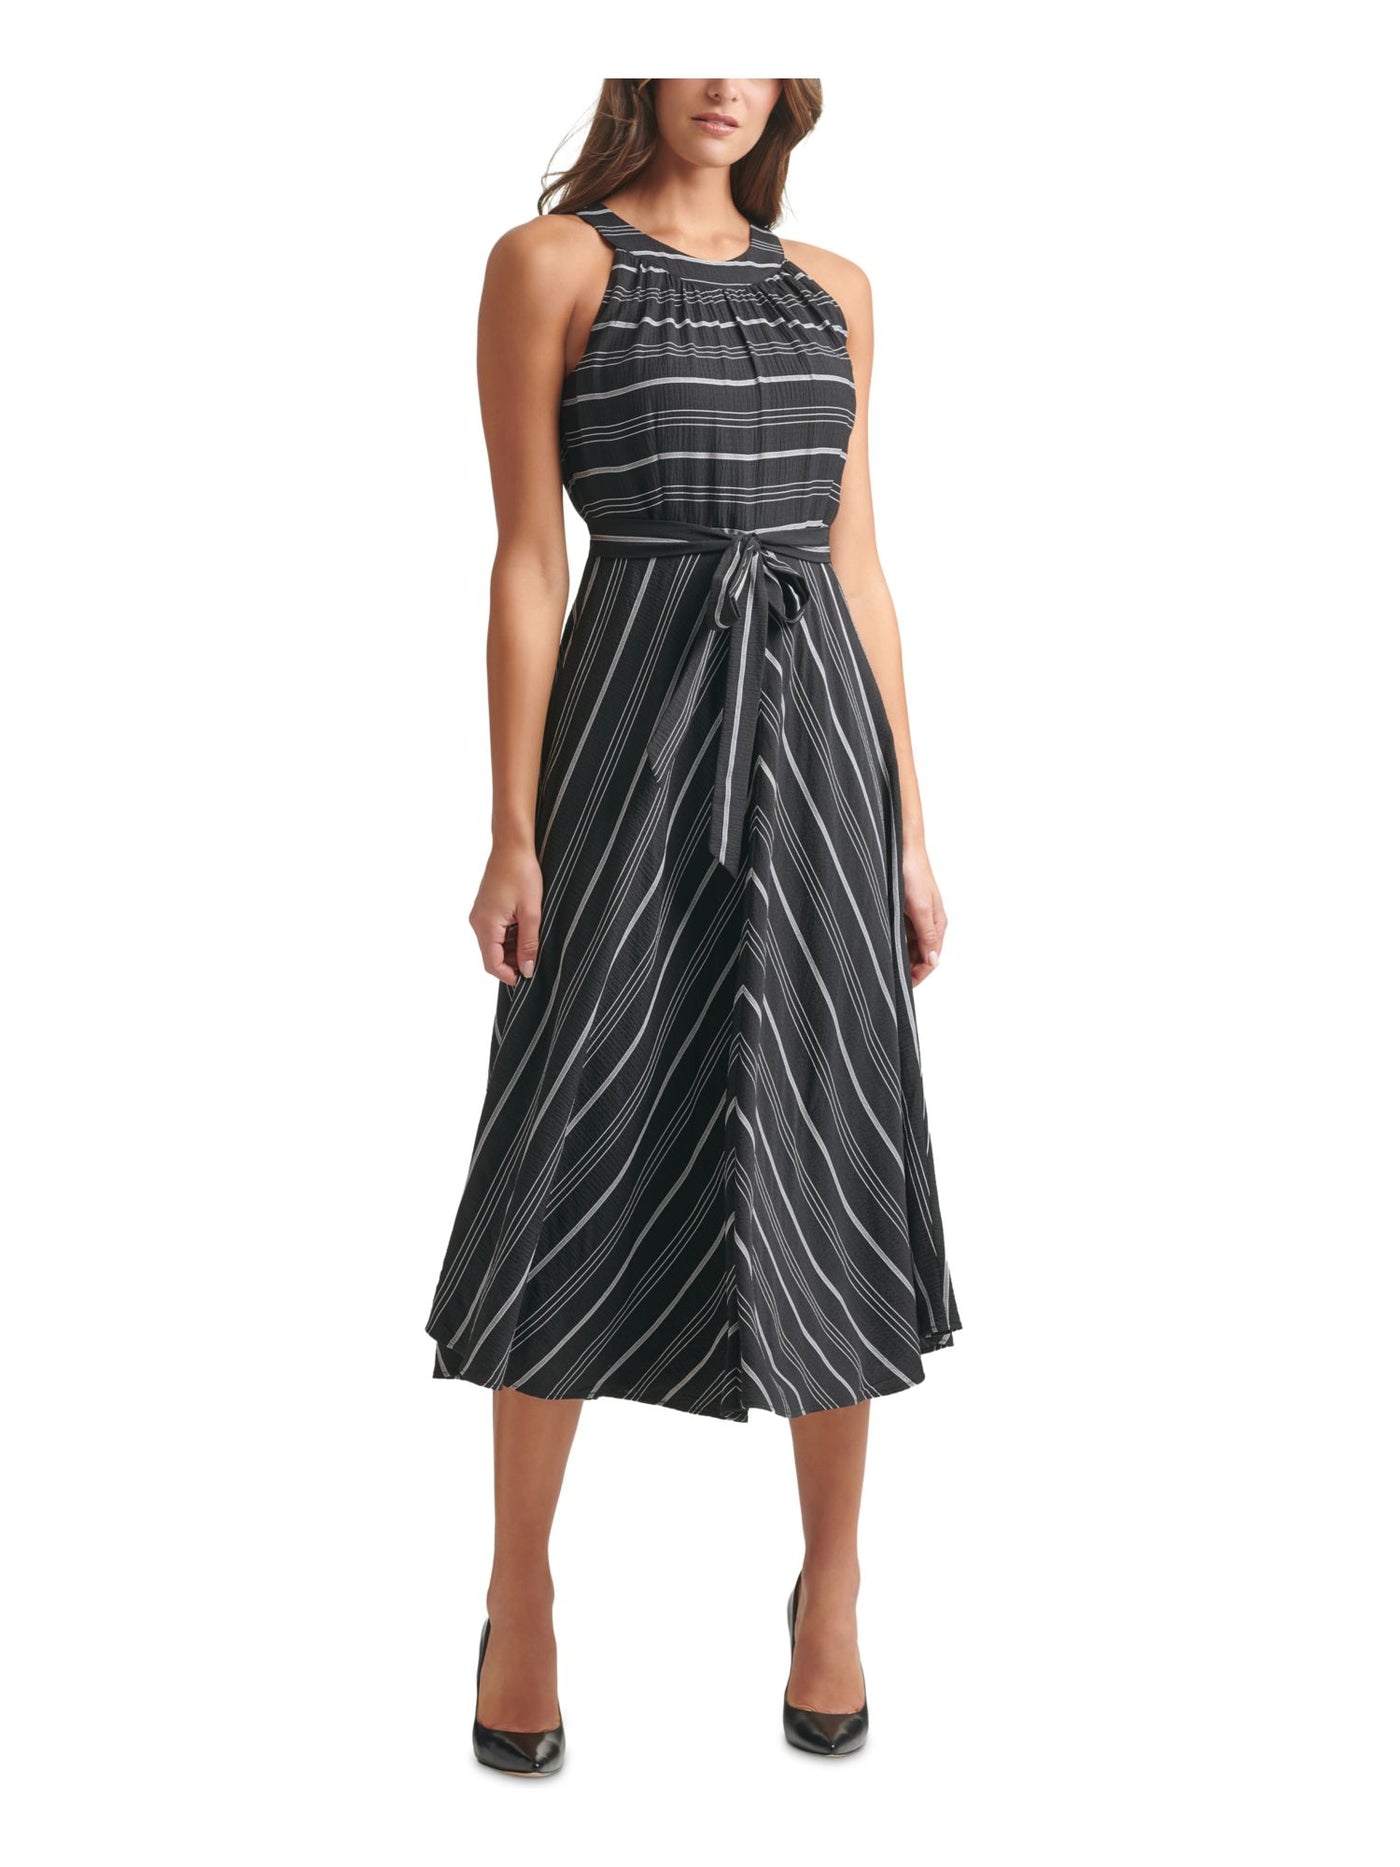 TOMMY HILFIGER Womens Black Stretch Zippered Belted Chiffon Striped Sleeveless Halter Maxi Fit + Flare Dress 6